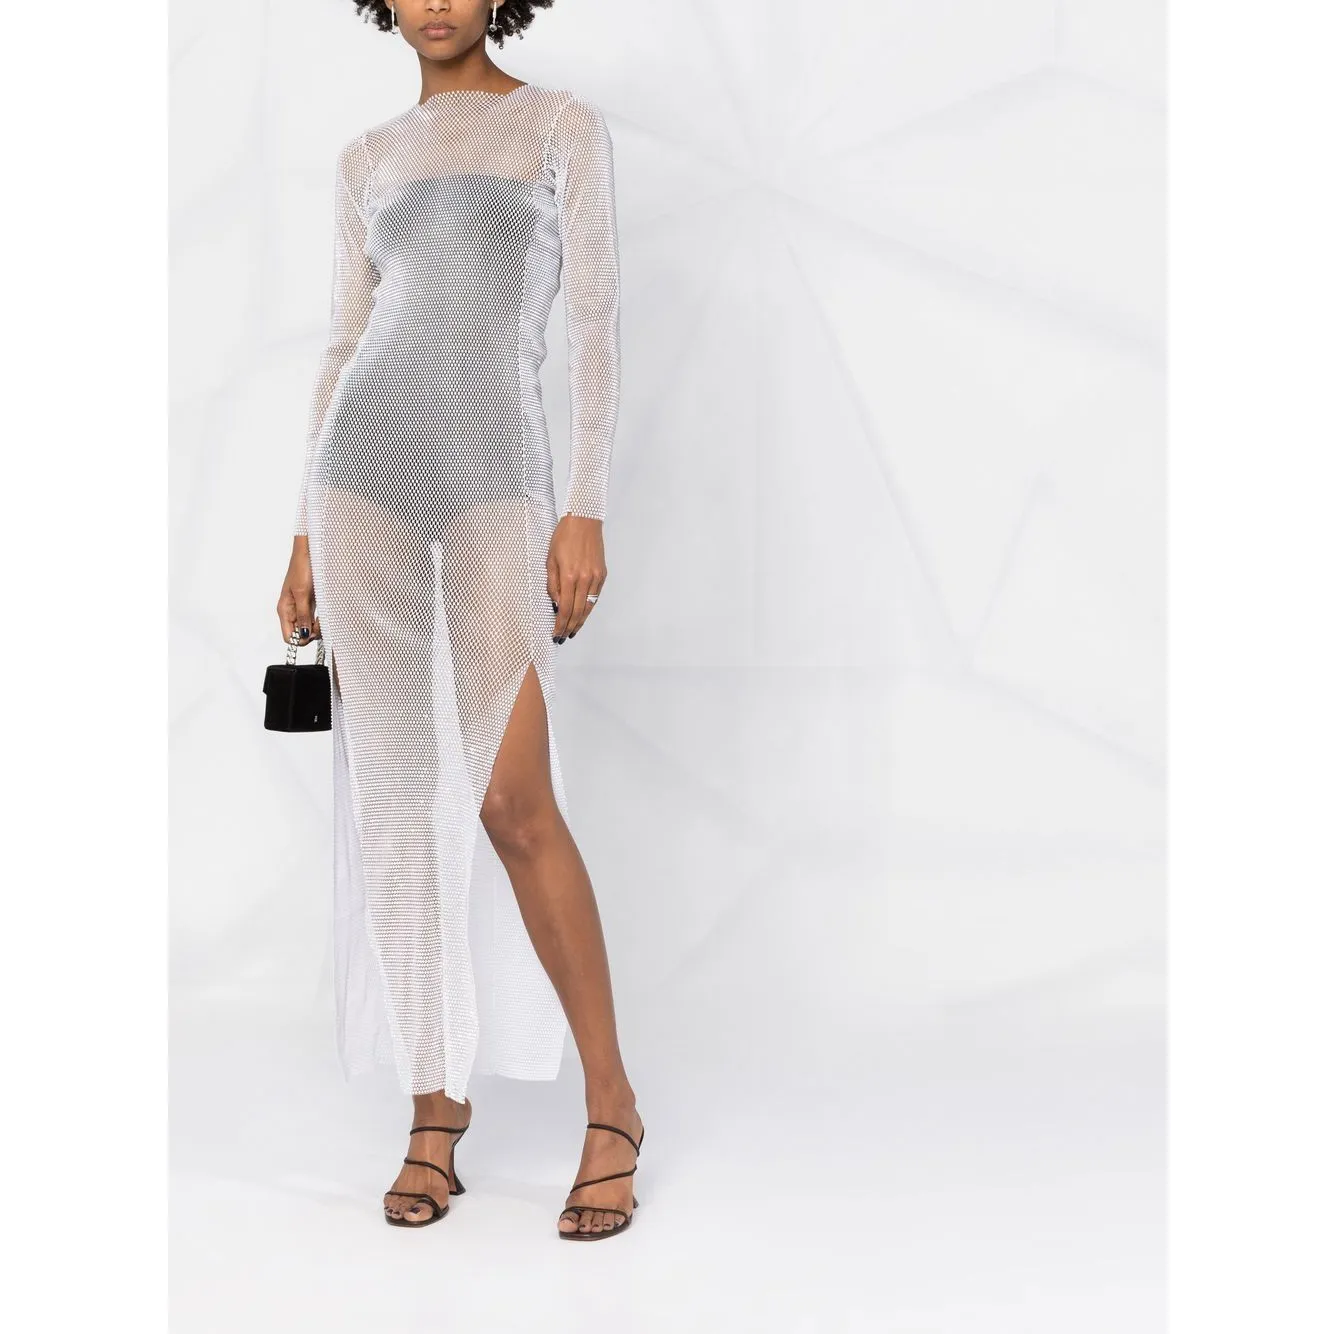 Diamond Mesh Dresses See Through Glittery Club Party Clothing Luxury Rhinestone Sparkled Maxi Embellished Sheer Dress In White